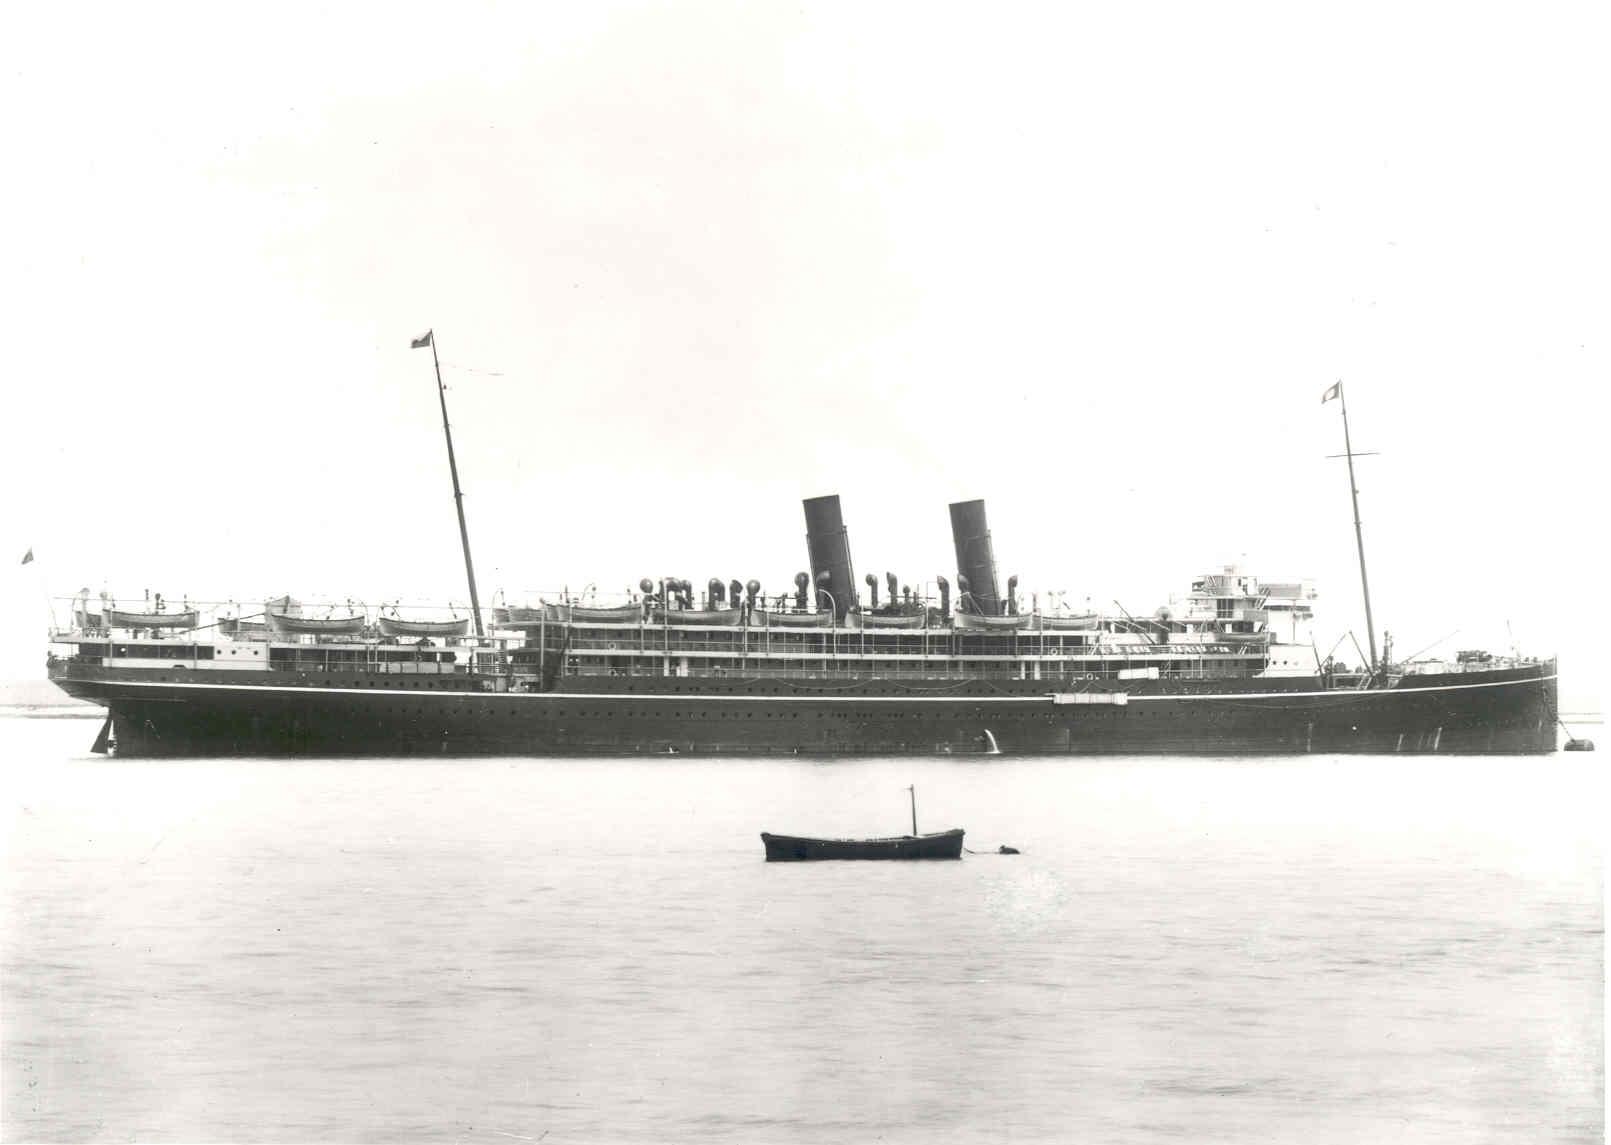 Passenger vessel "Mantua", built in 1909 by Harland & Wolff - Belfast.  This vessel was launched on 20 - 2 - 1909 and completed in April 1909.  She took her inaugural voyage on 4 - 6 - 1909 from London to Sydney.  
Base Port:  London
Tonnage:  10885 gro